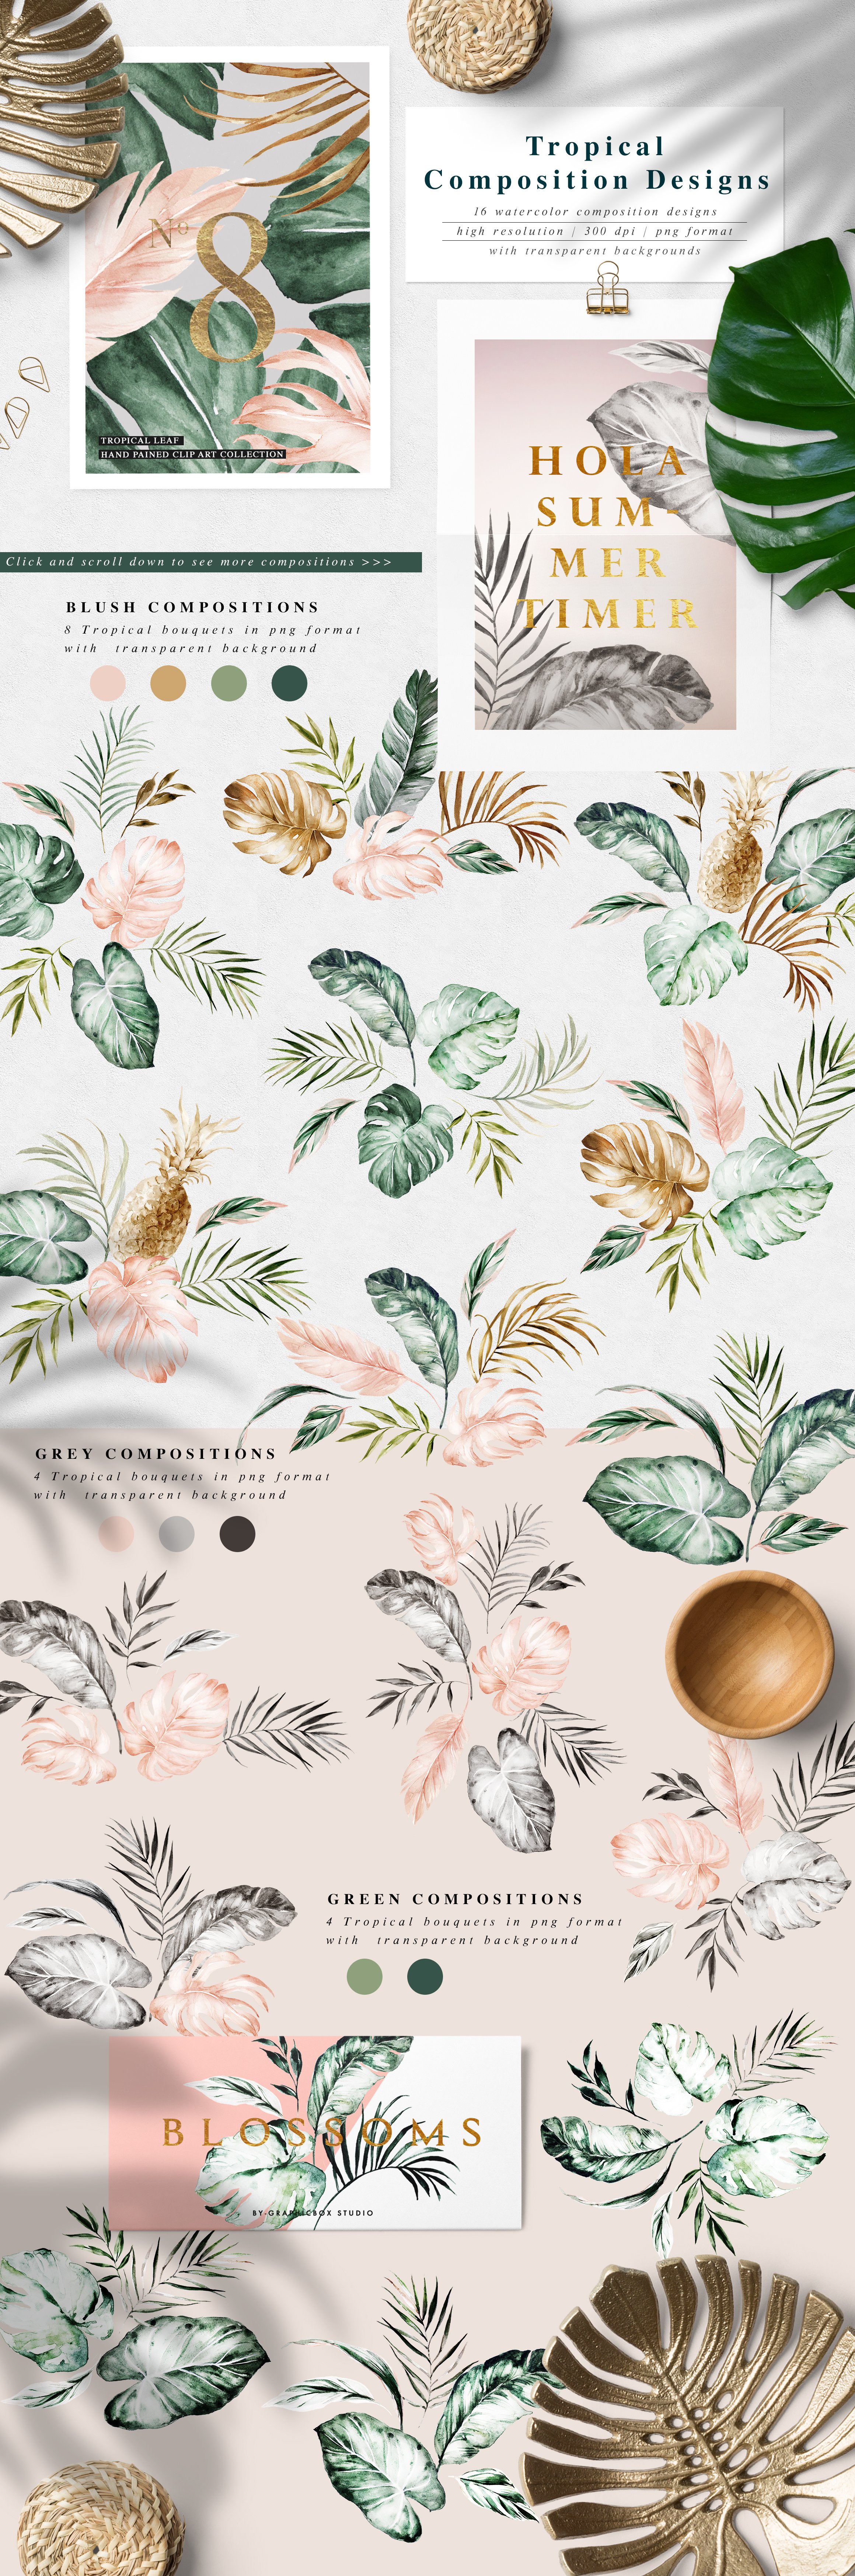 Wallpaper with a variety of plants and leaves on it.